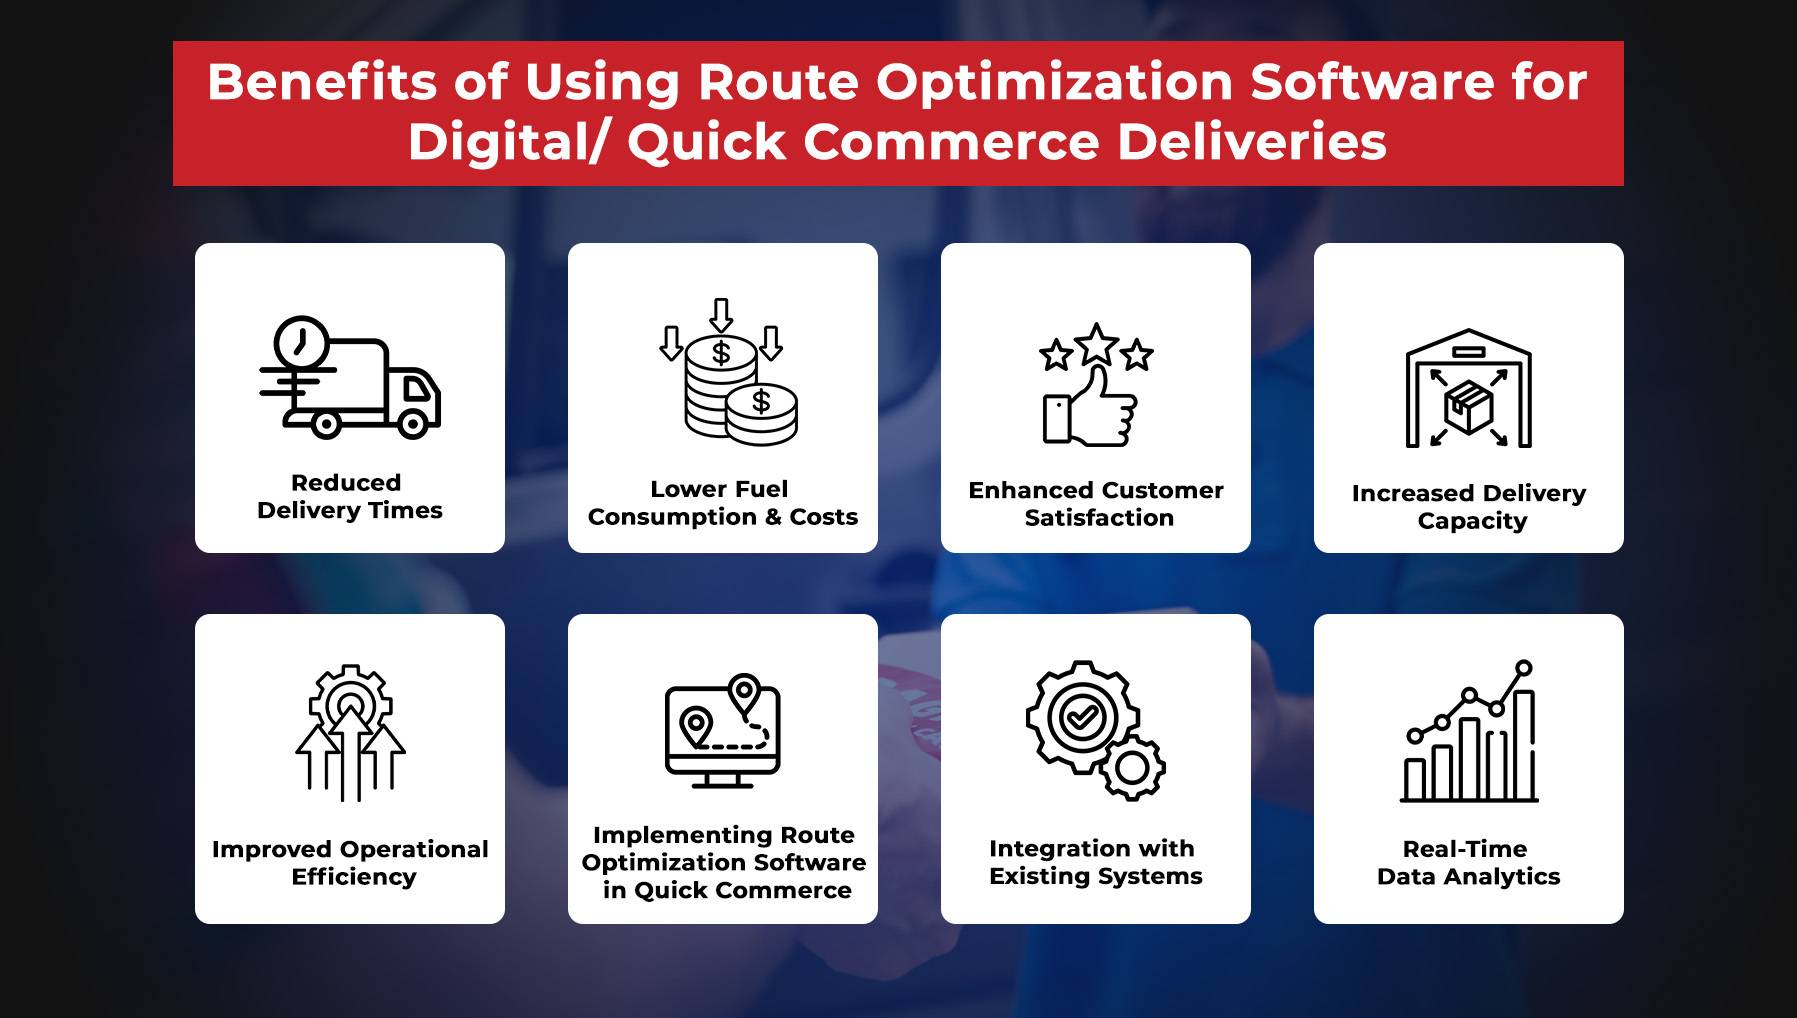 How can quick commerce benefit using route optimization software?